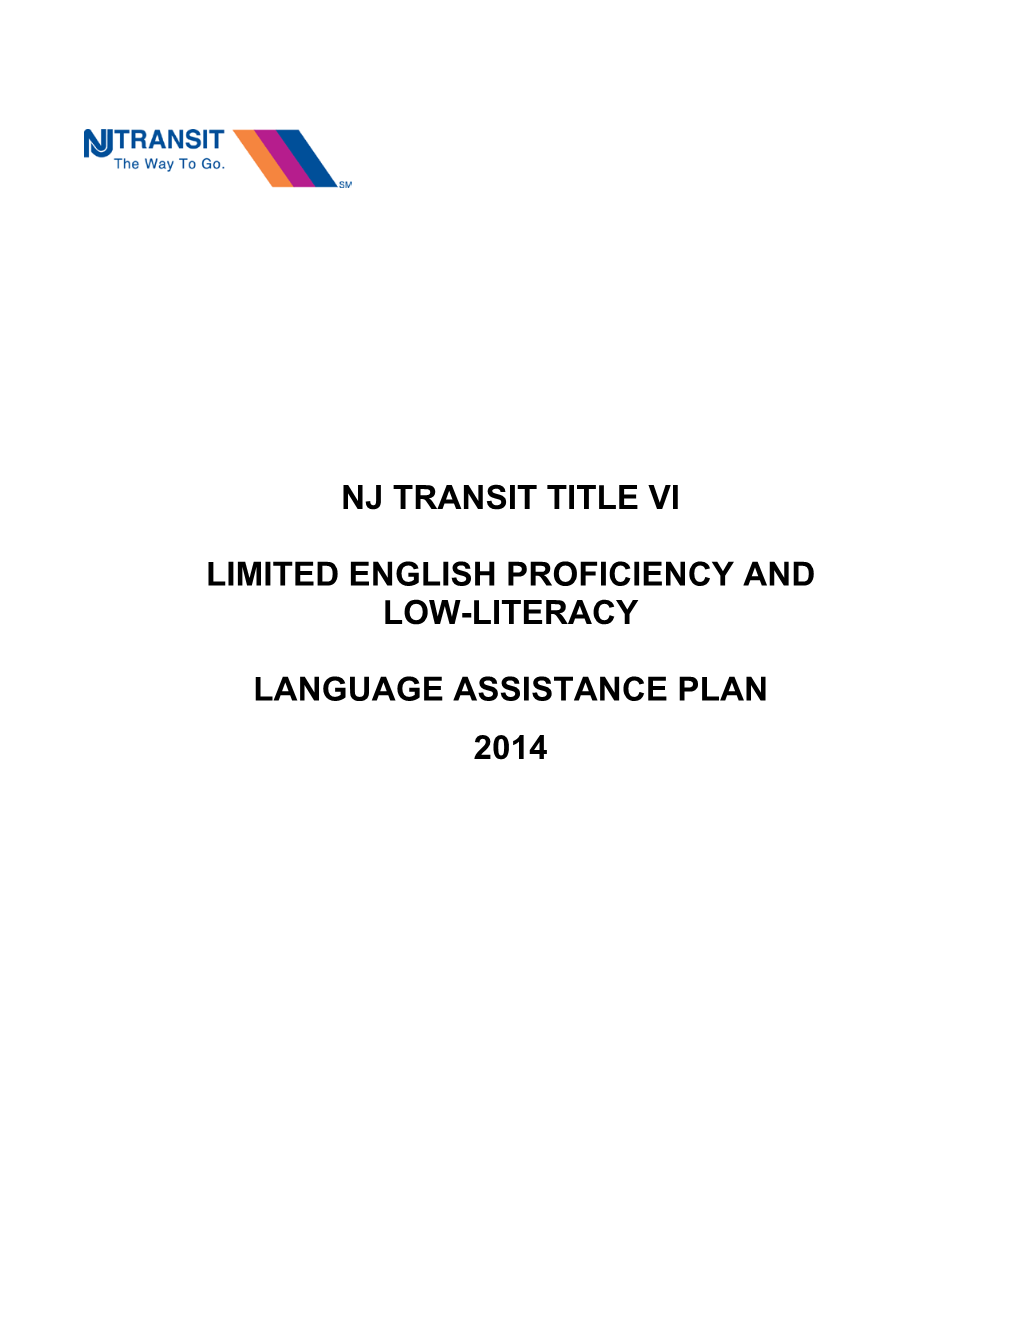 Nj Transit Title Vi Limited English Proficiency and Low-Literacy